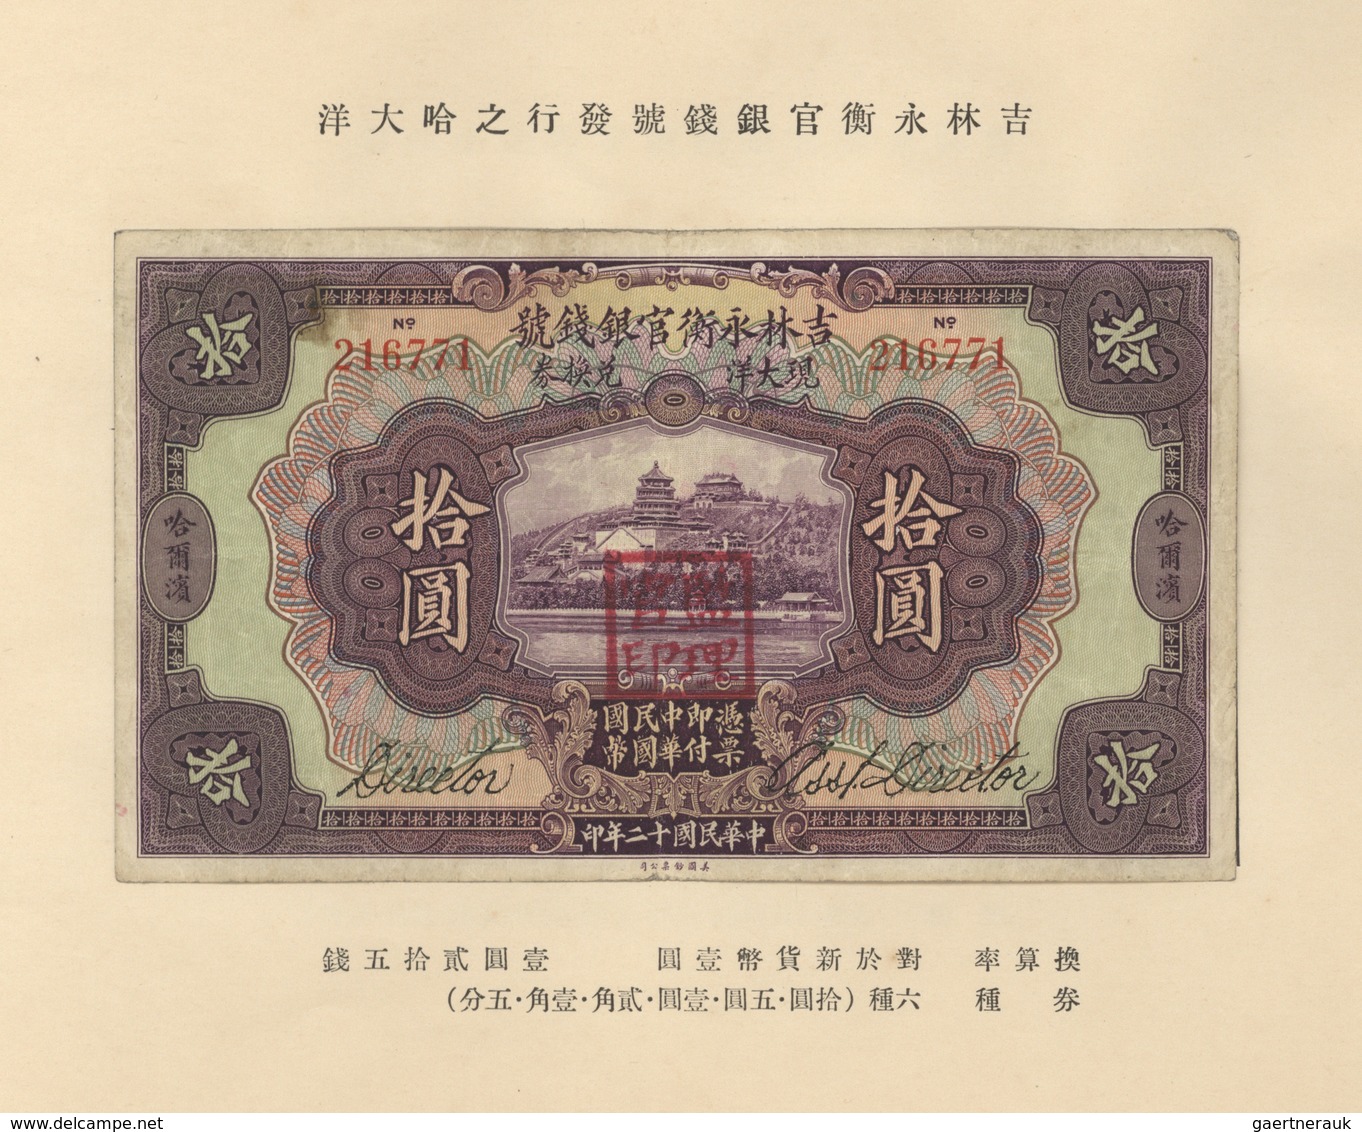 China: set of 11 rarely seen banknotes Provincial Banks in presentation booklet containing: Frontier